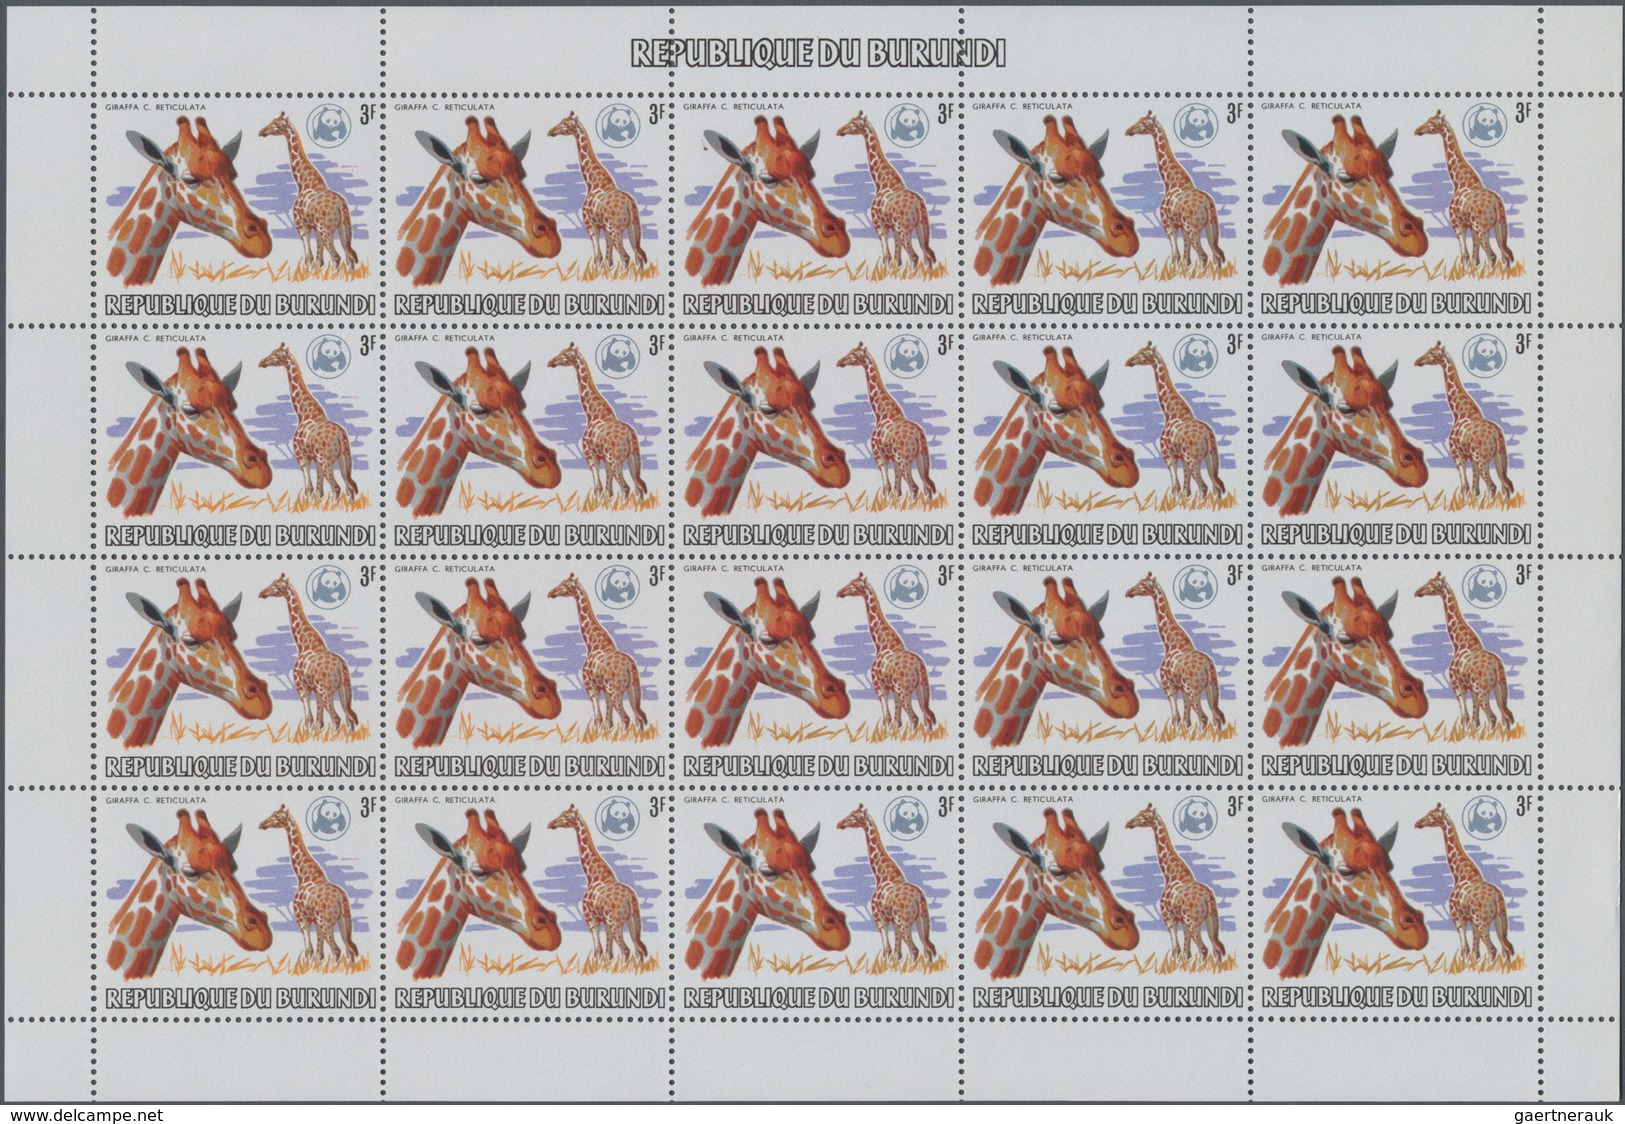 Burundi: 1982. AFRICAN WILDLIFE. Complete set of 13 from 2fr. to 85fr. in complete sheets of 20 stam